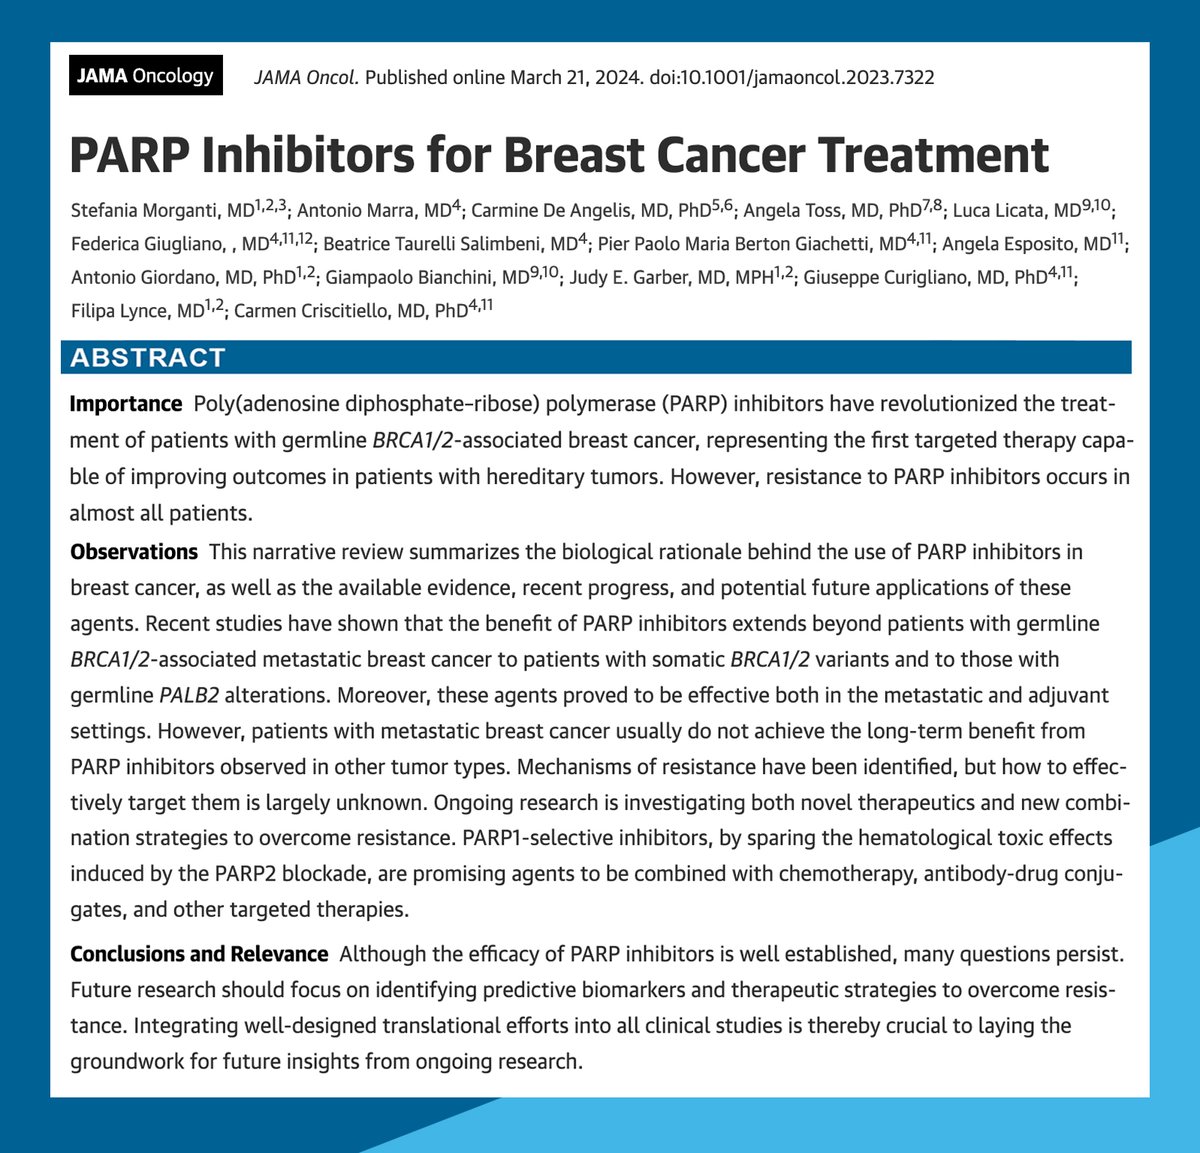 Have you read this excellent @JAMAOnc review on #PARPInhibitors for #BreastCancer Treatment? 
If not, here is the link 👇👇👇pubmed.ncbi.nlm.nih.gov/38512229/
@StefiMorganti @CarmenCriscit @FilipaLynce @antgiorda @antoniomarraMD @CarmineDeA1 @curijoey @judygarber5 @BianchiniGP @angela_toss